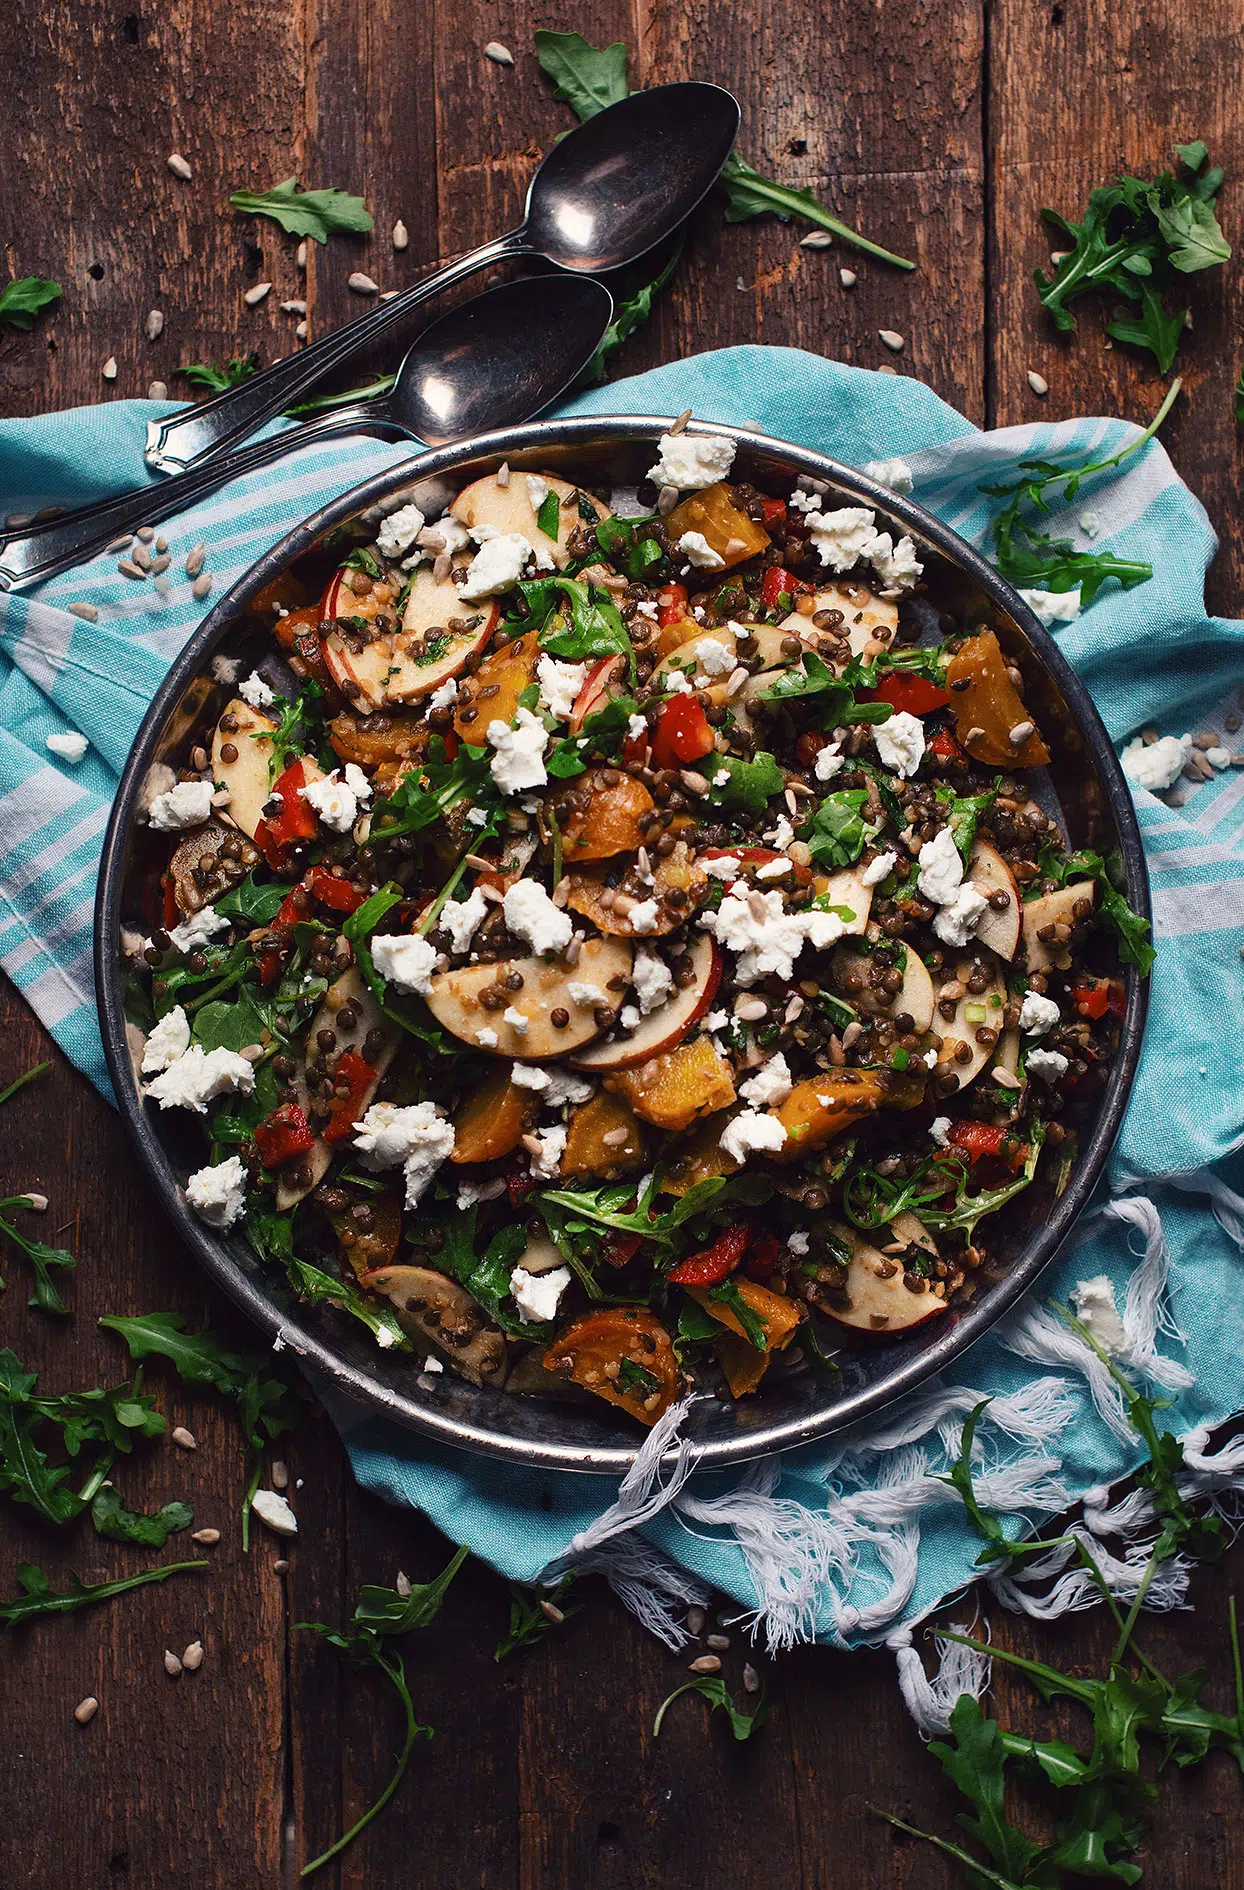 Lentil, apple and beet salad with goat cheese